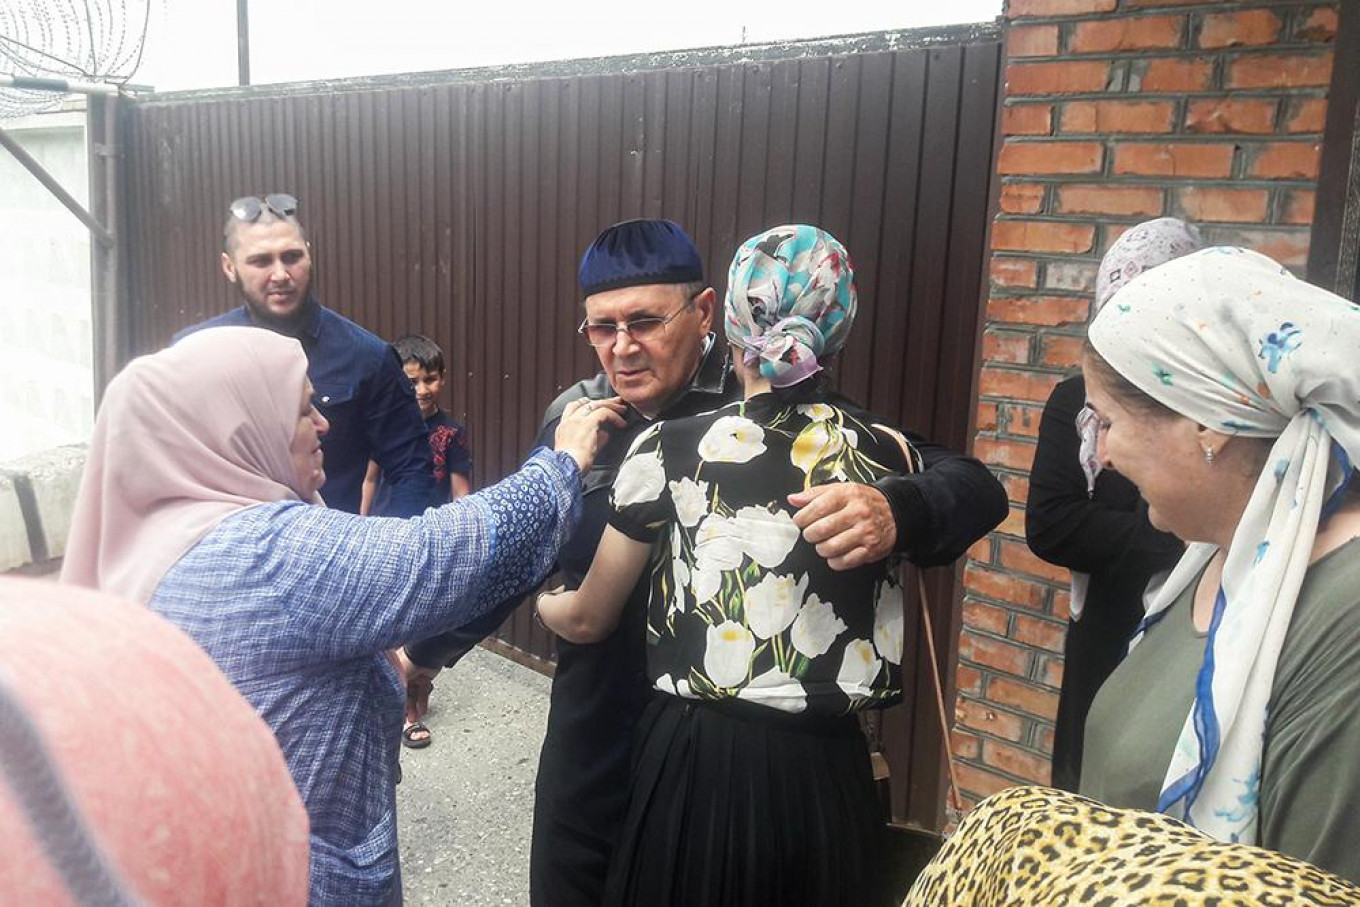 Chechen Human Rights Leader Titiyev Released From Prison, 18 Months After Arrest